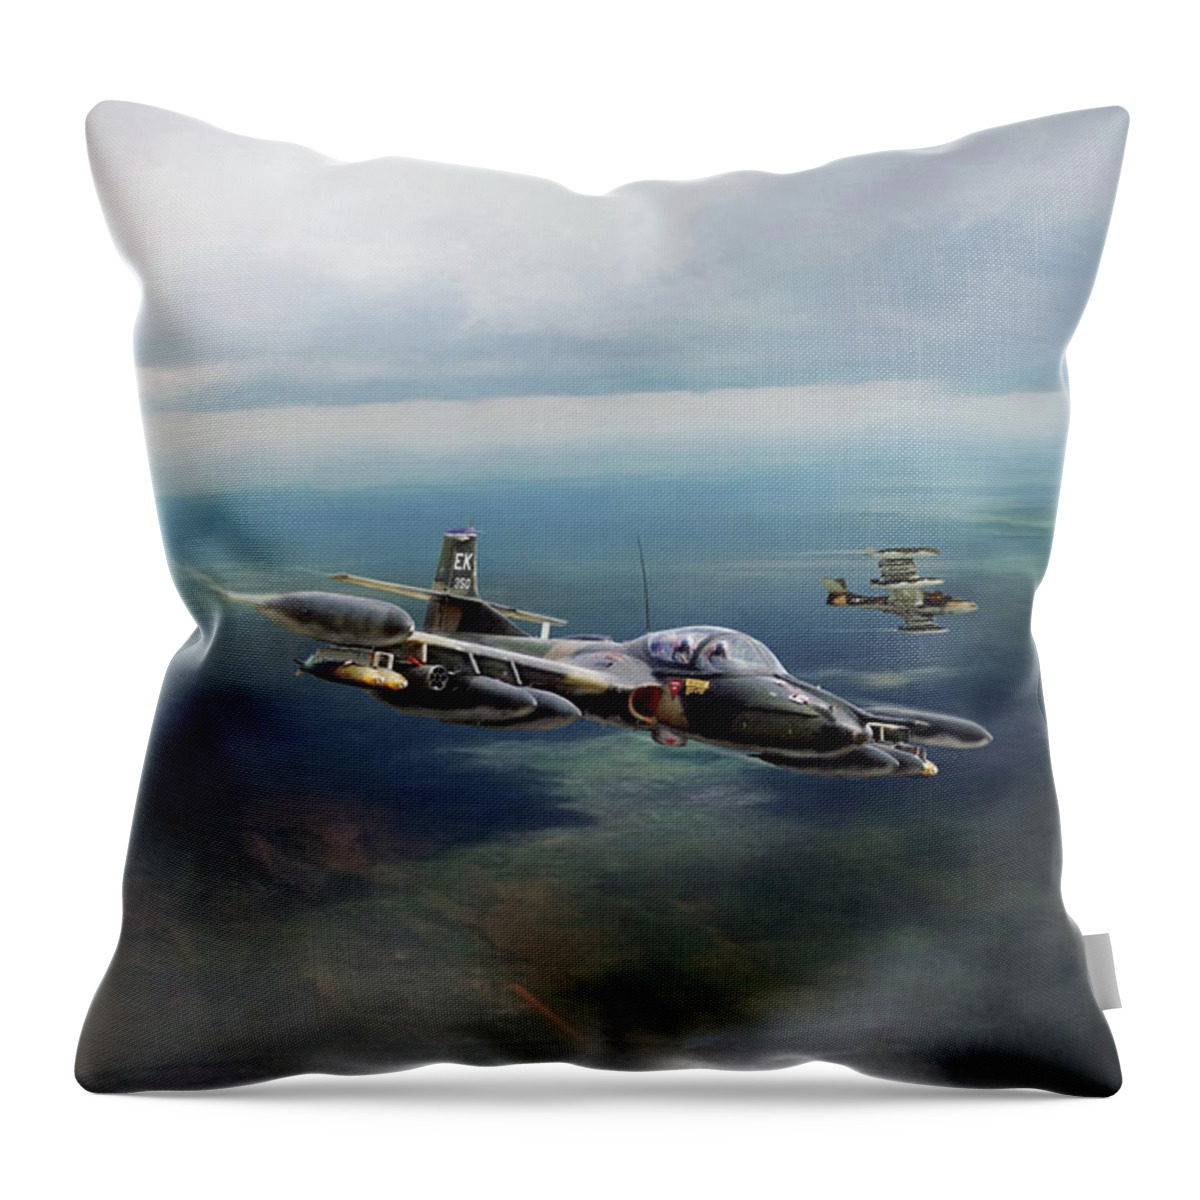 Aviation Throw Pillow featuring the digital art Dragonfly Special Operations by Peter Chilelli